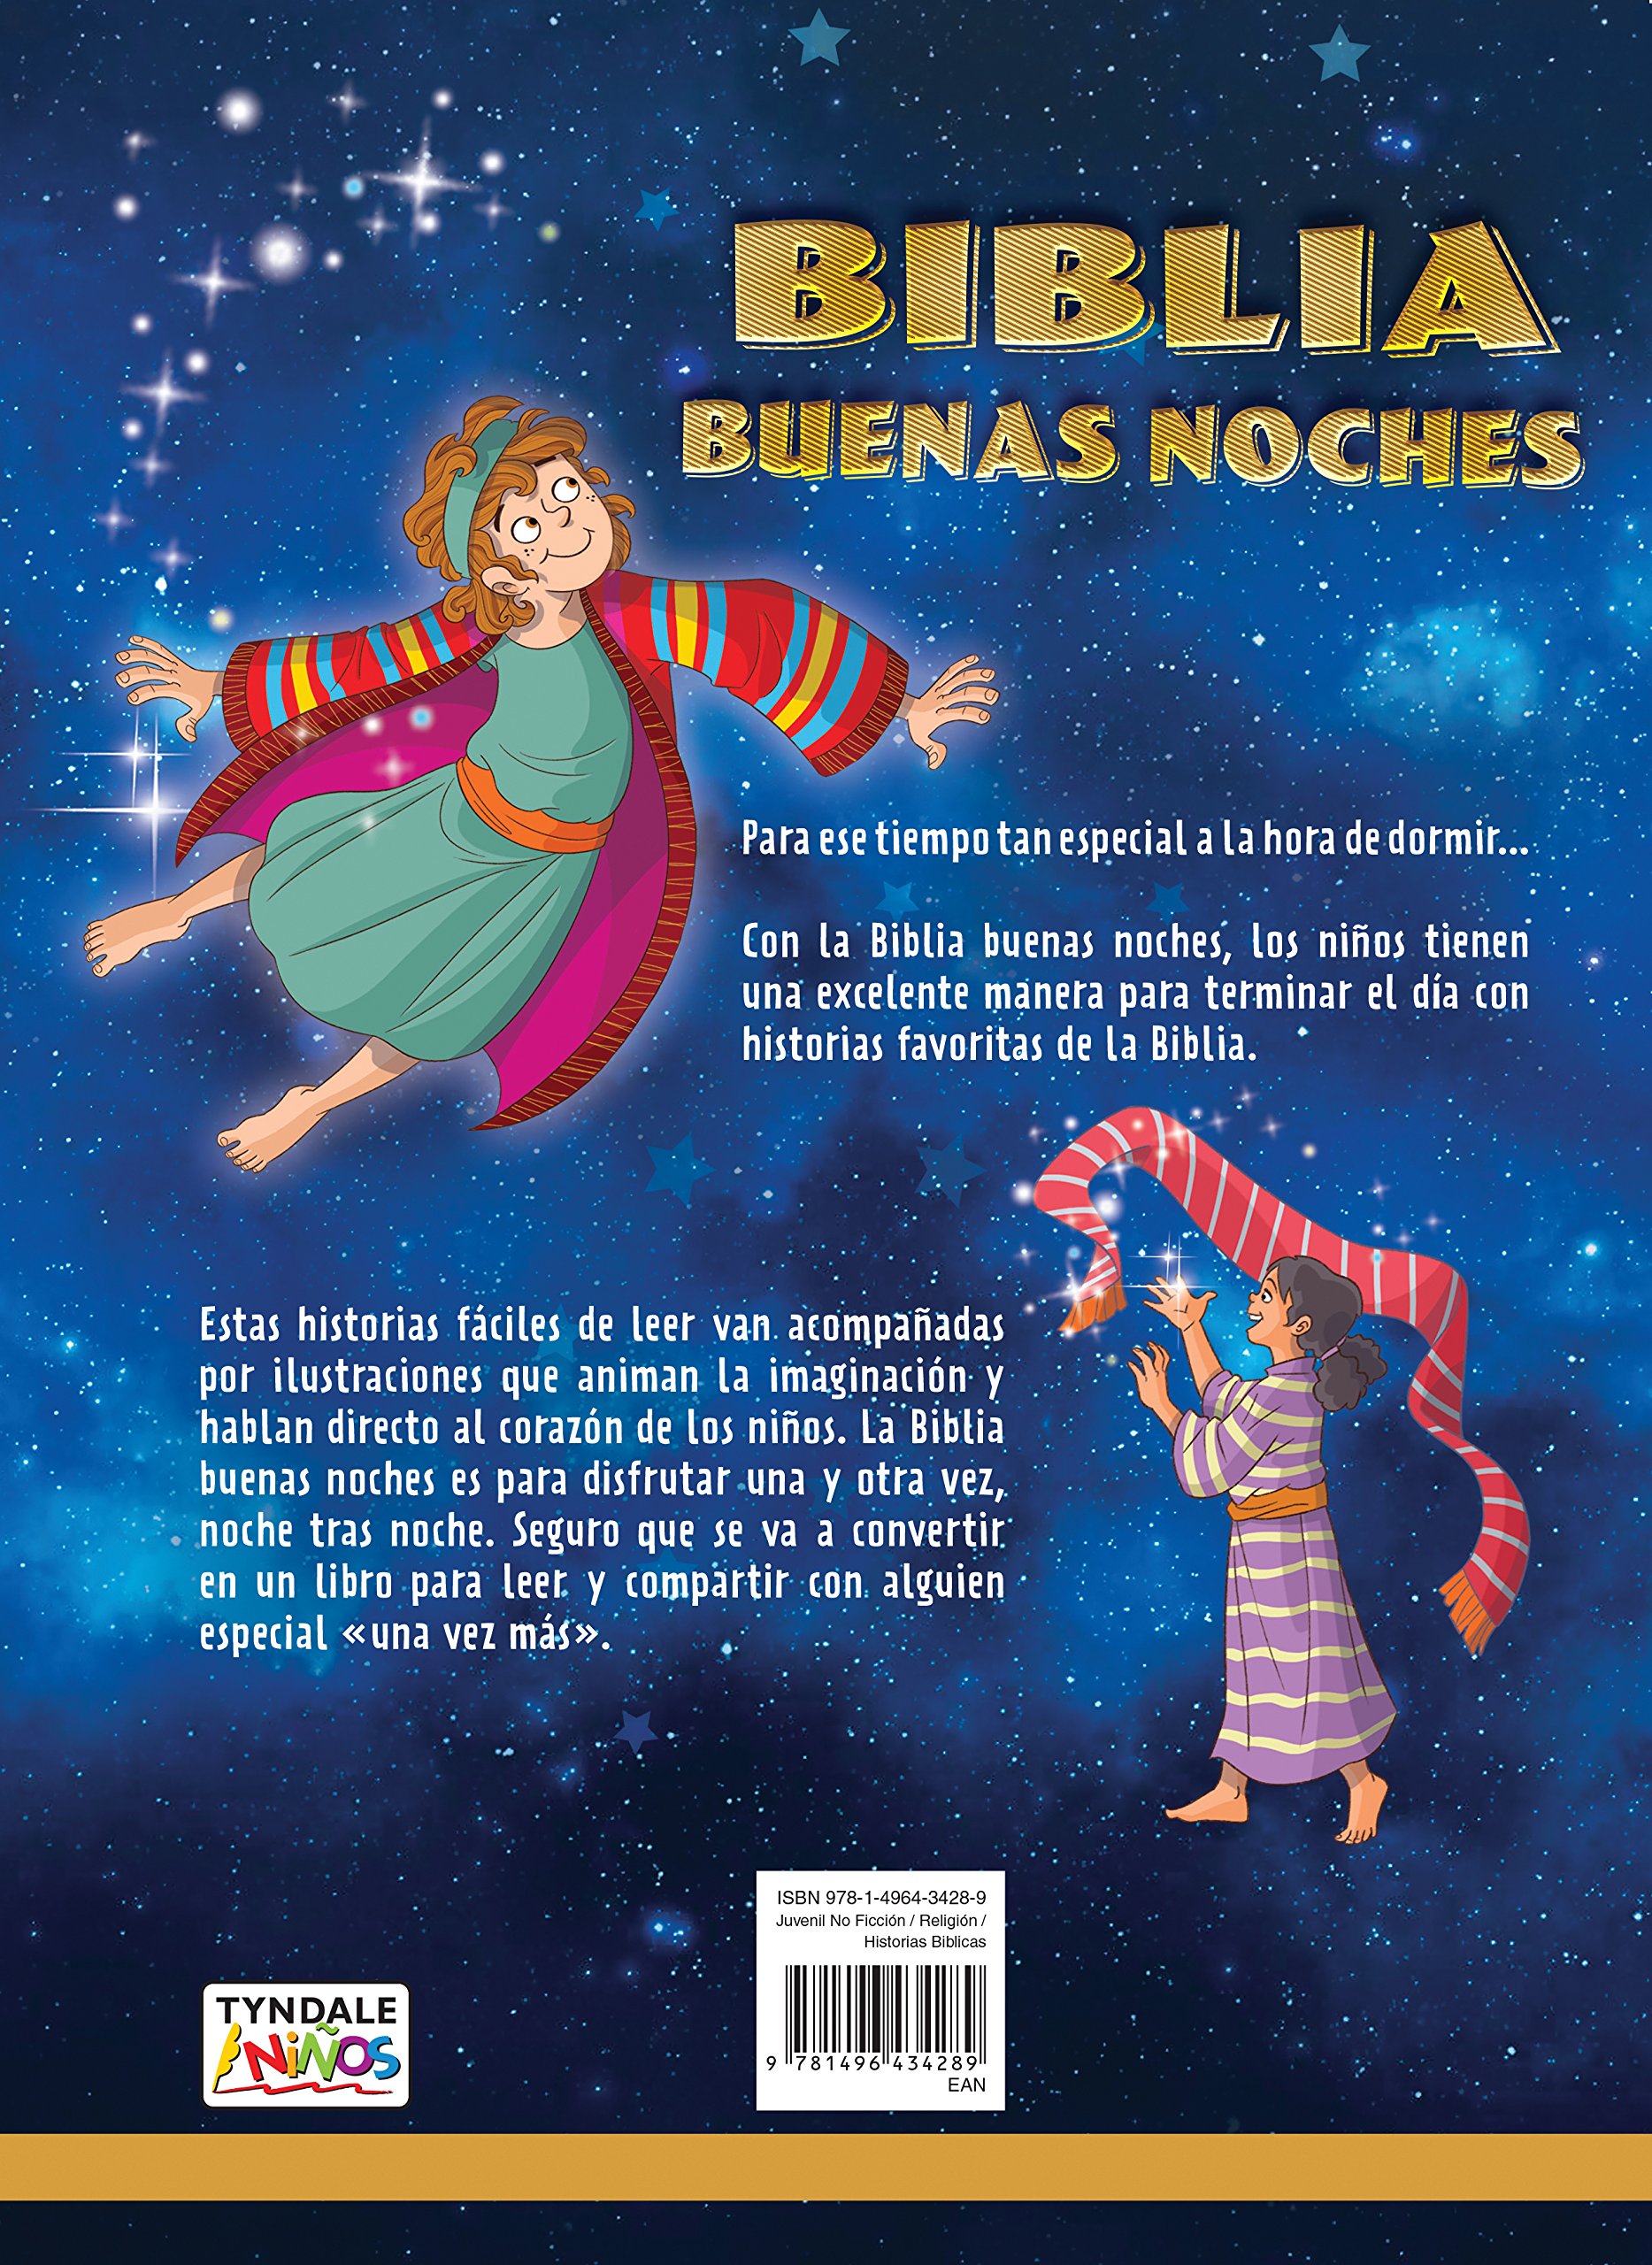 Biblia Buenas Noches (Bedtime Bible Stories) | By His Hands Inc.